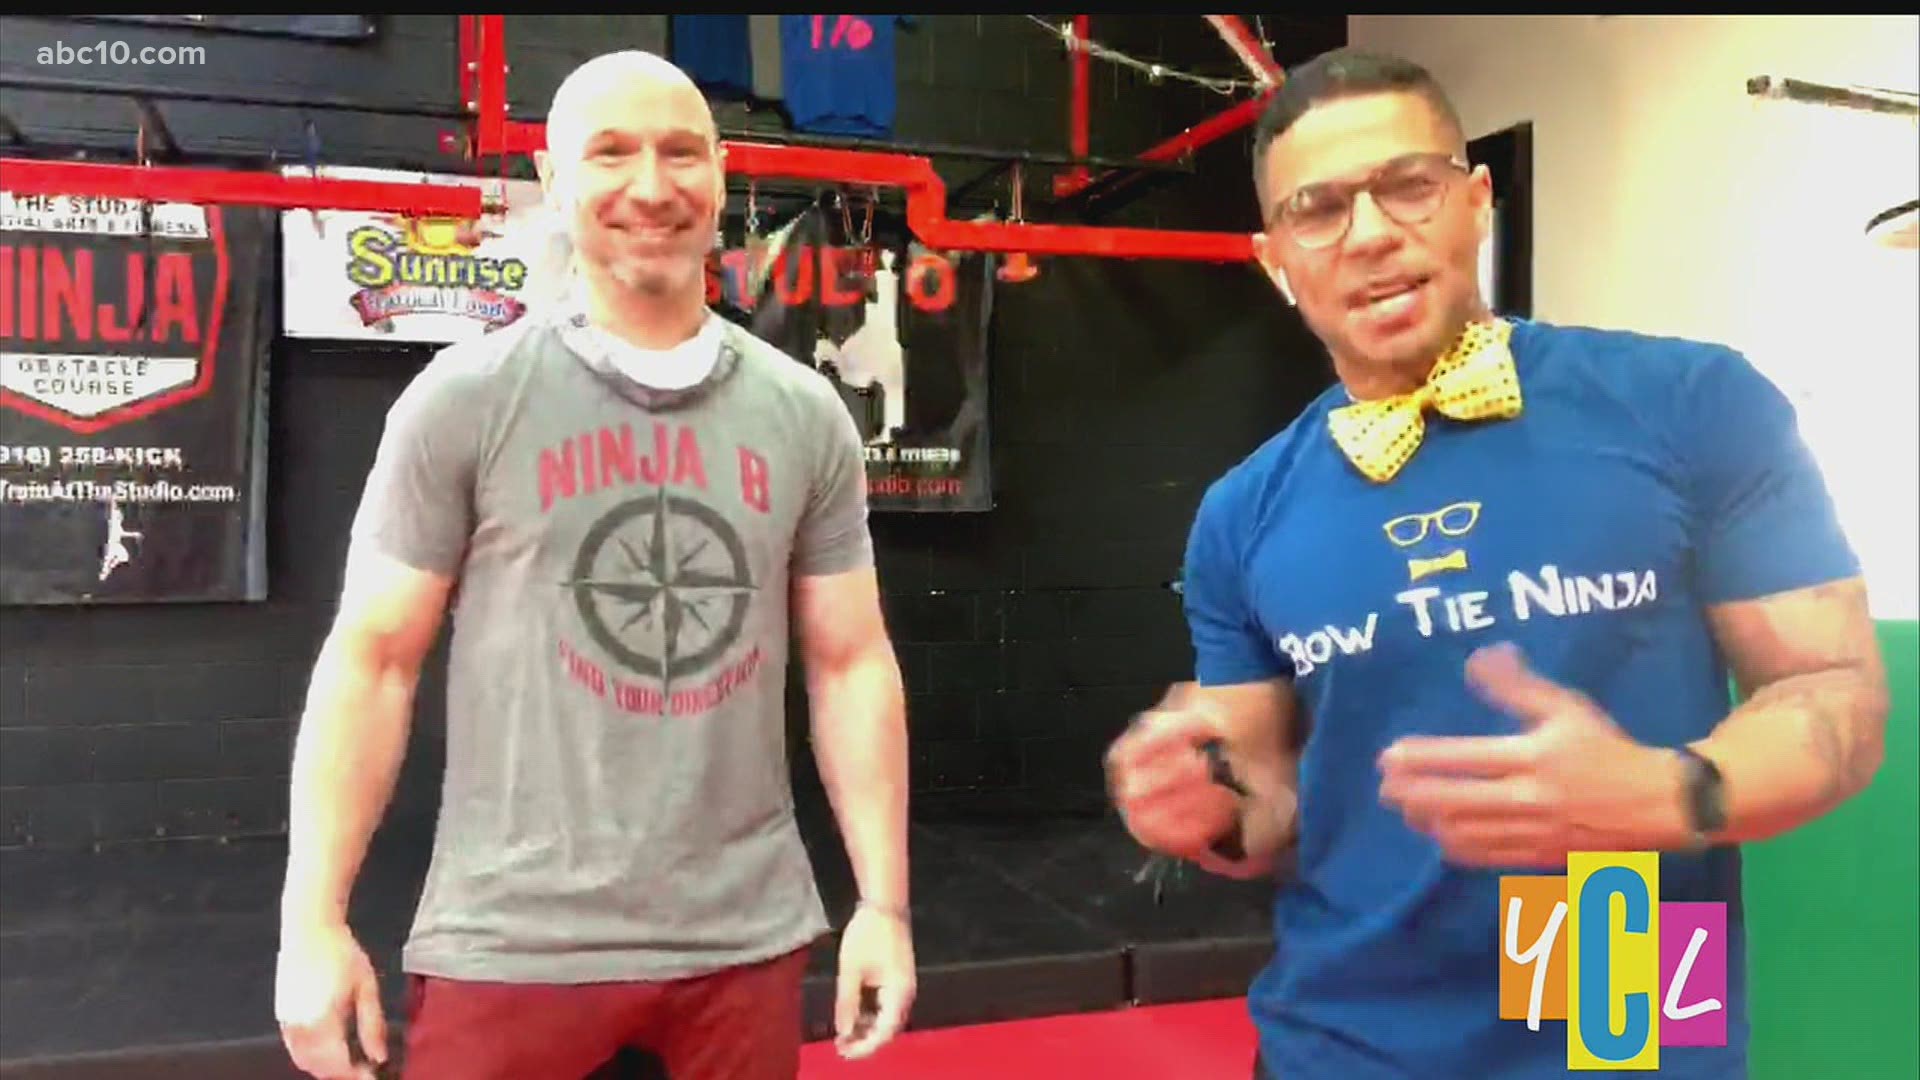 Meet a couple of the local competitors ready to flex their skills on "American Ninja Warrior." Learn more about their training ground at The Studio Martial Arts.